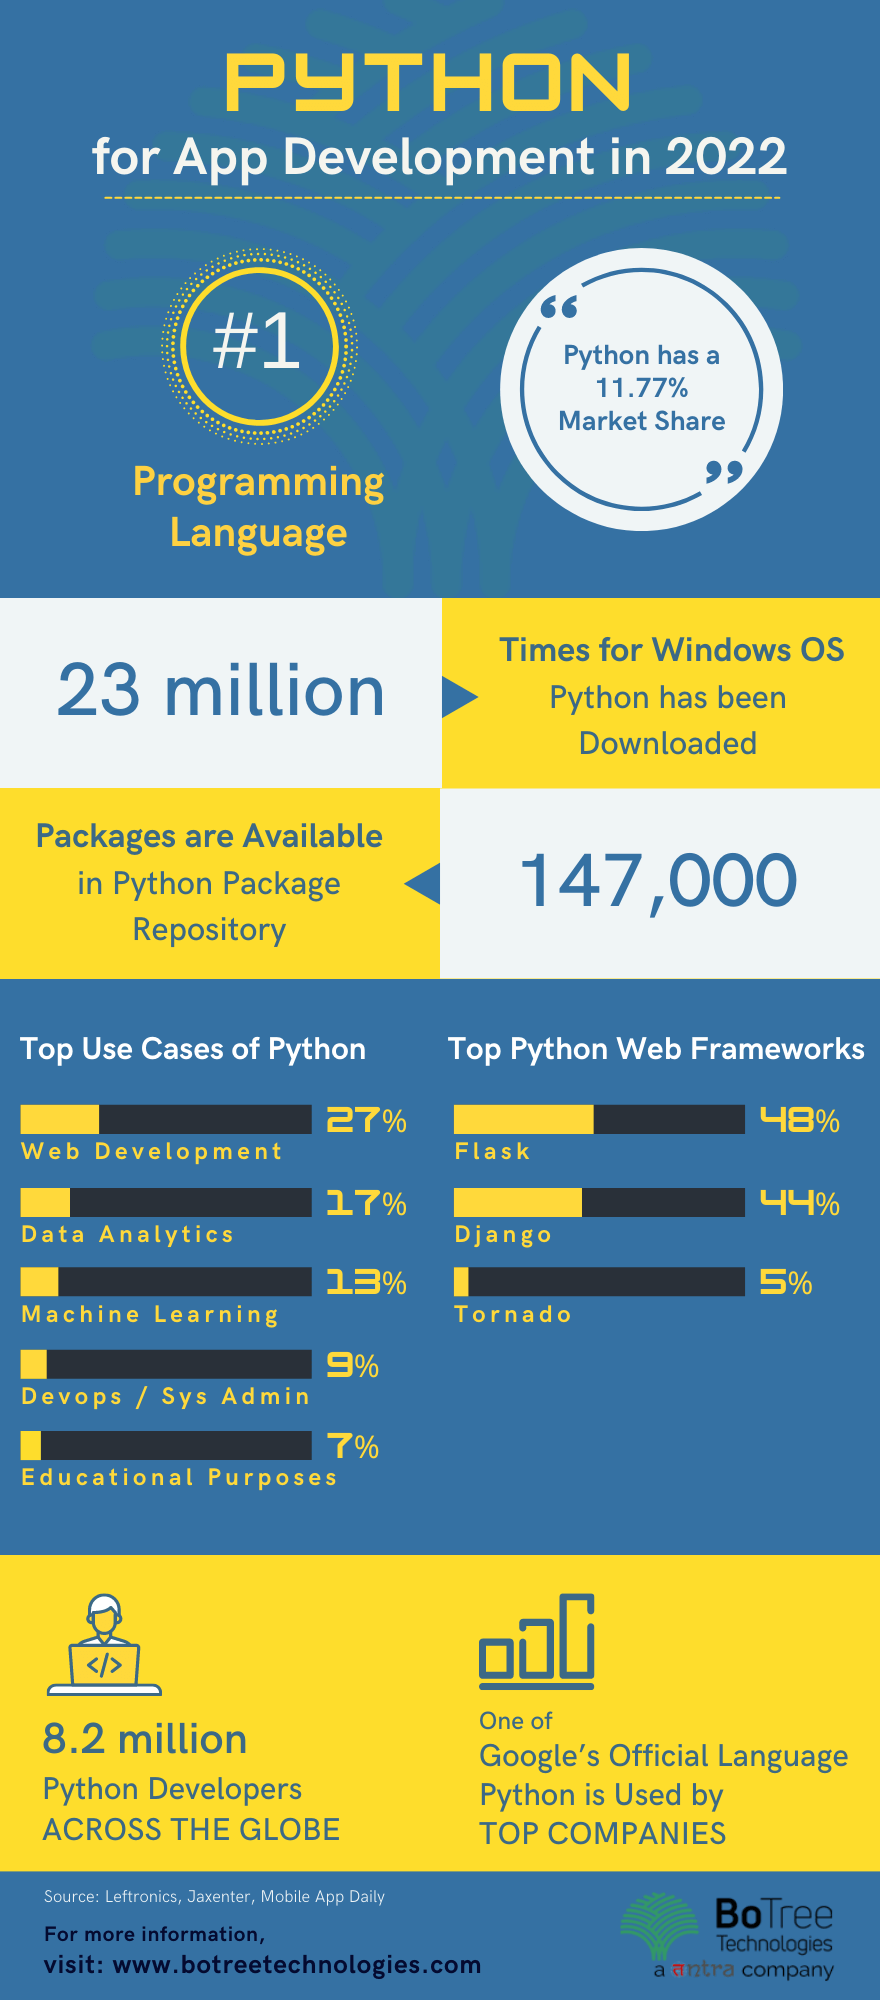 Python used for Enterprise Applications